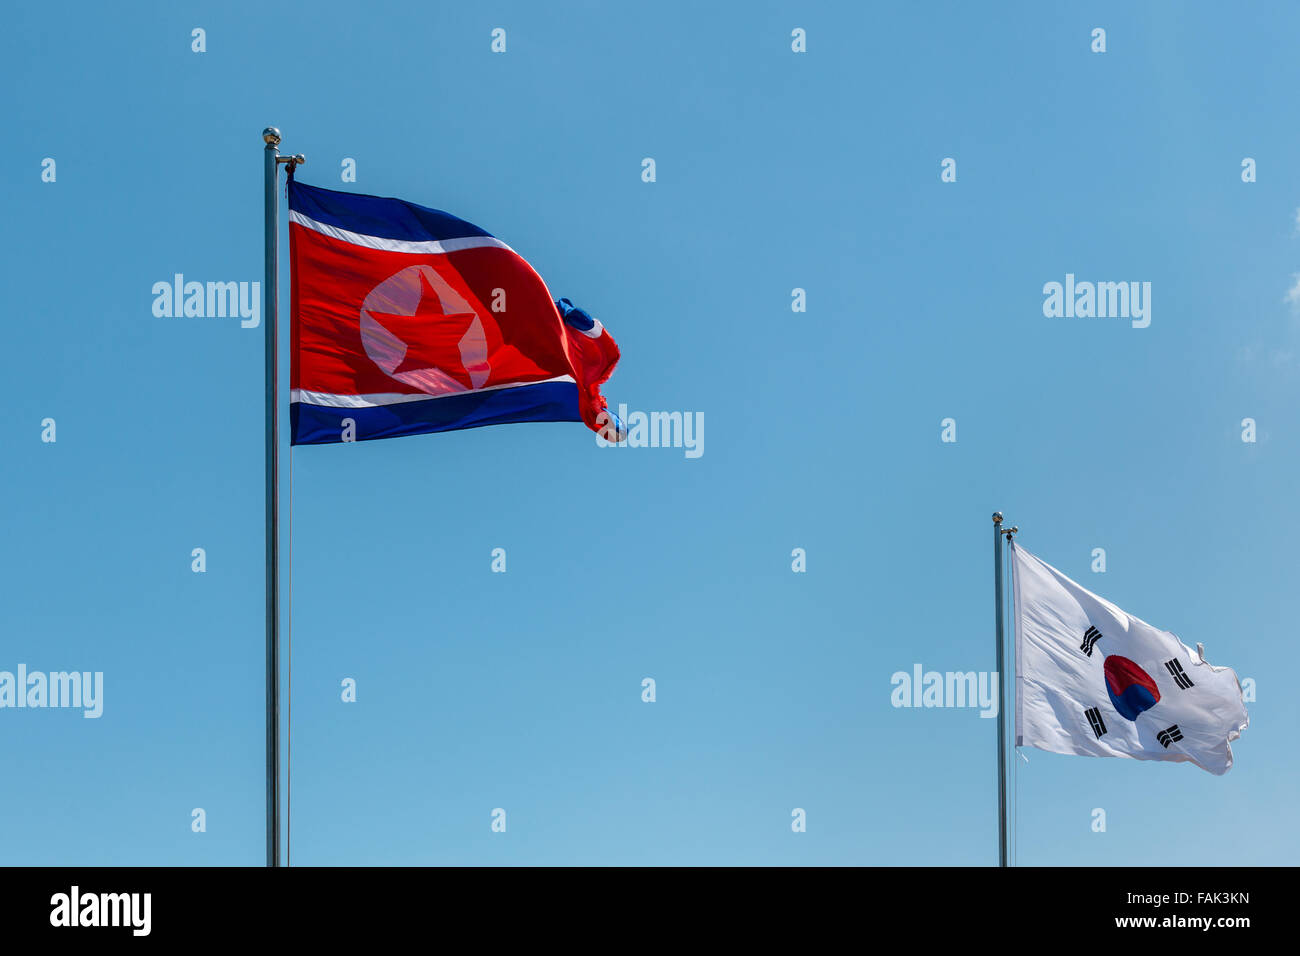 North and South Korean flags, North Korea, South Korea, flags waving in the wind, blue sky Stock Photo